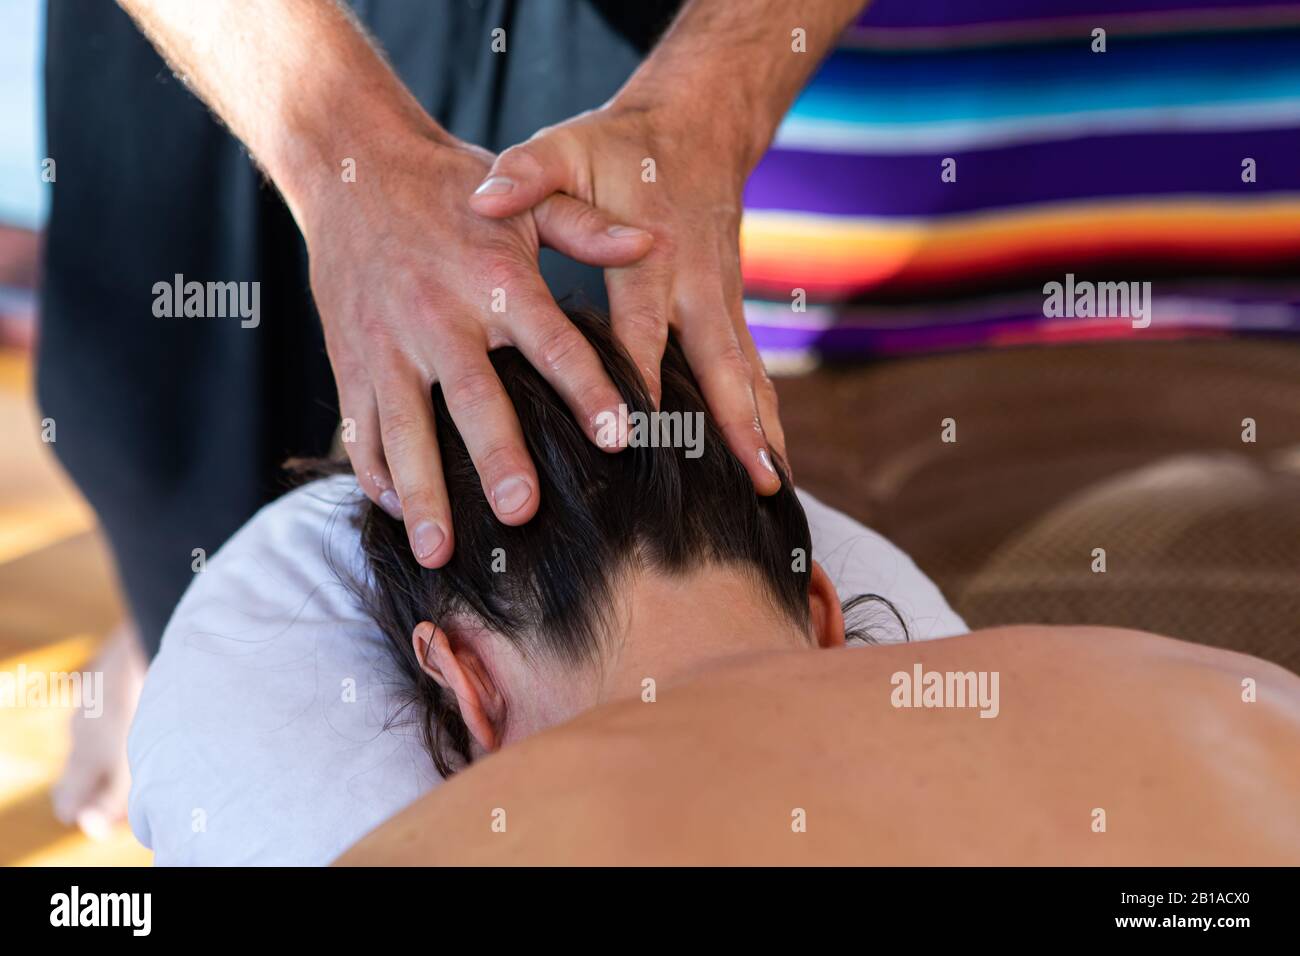 Young woman receiving a head massage in a cosy home environment. A professional masseur giving relaxing massage therapy to spa client Stock Photo